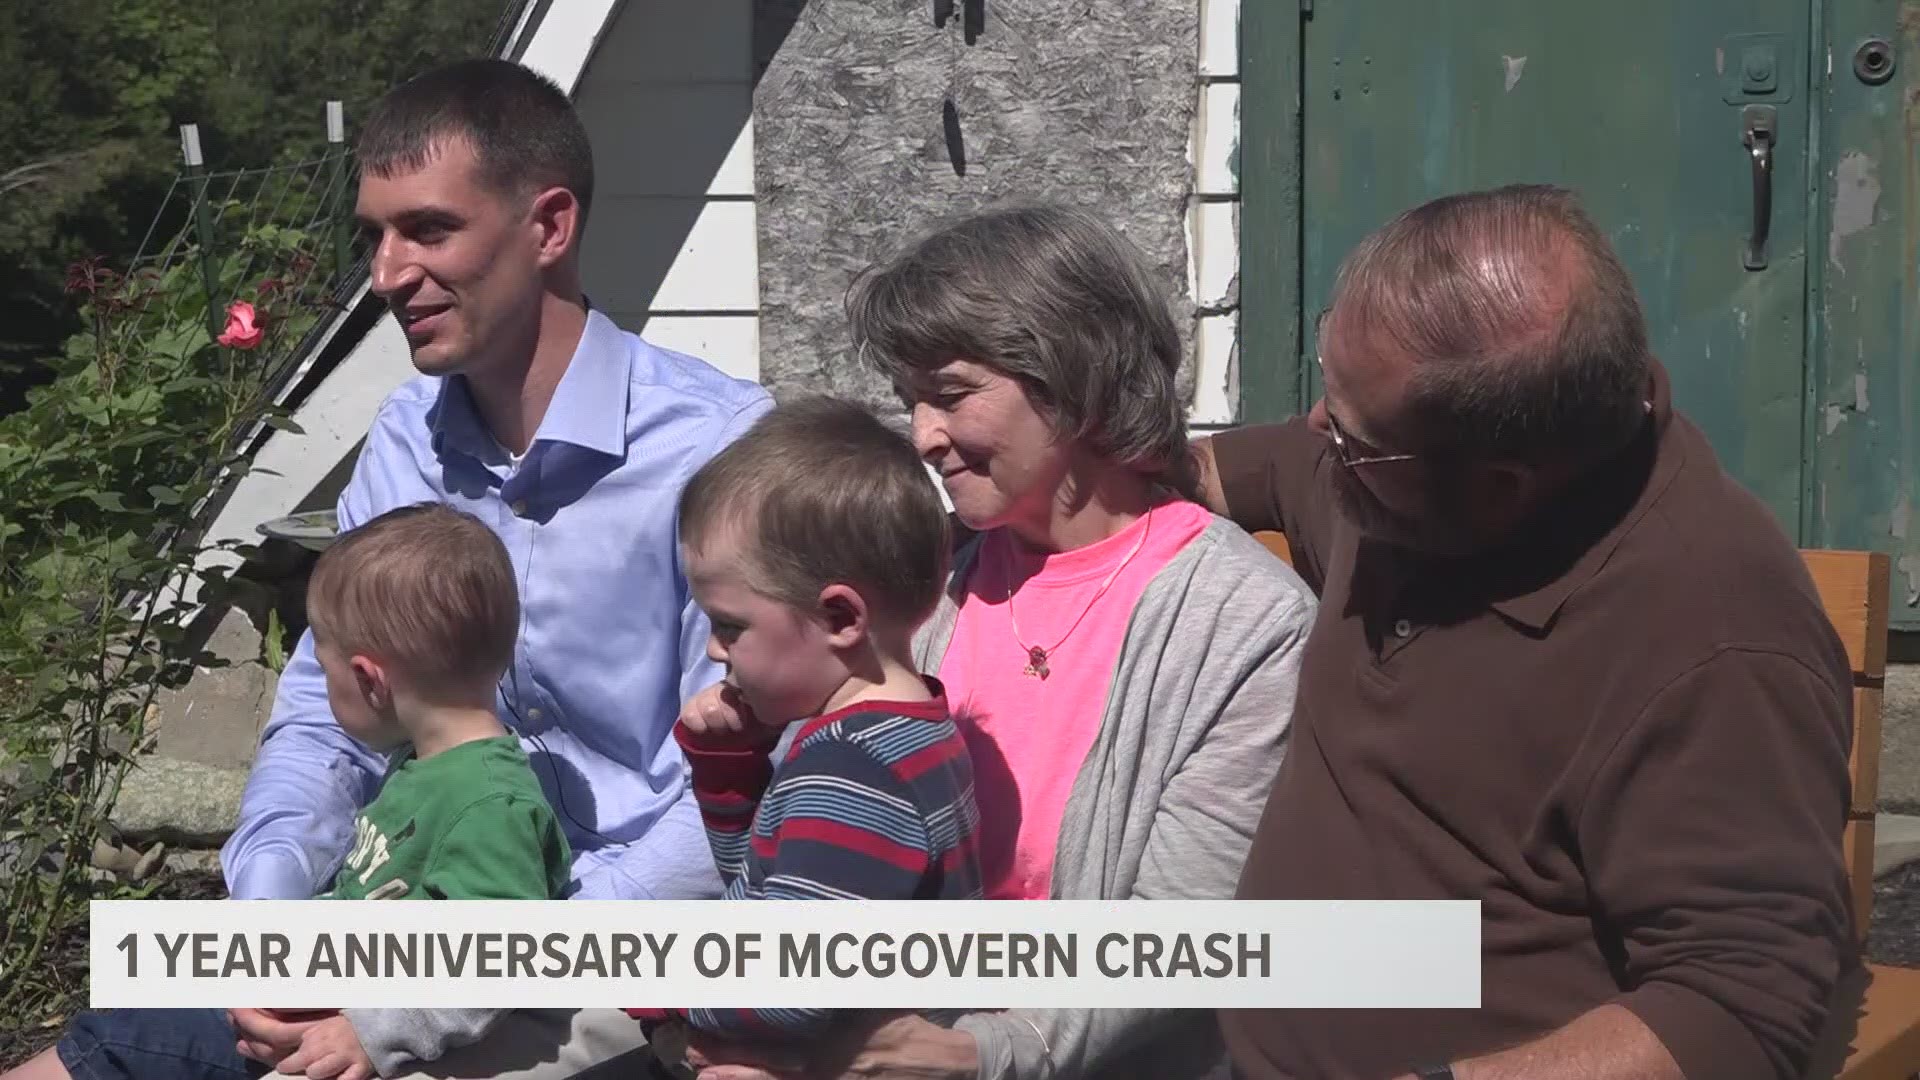 The family of Heidi McGovern is speaking exclusively to NEWS CENTER Maine, one year after her death and her 2-year-old son, Enoch, being severely injured.